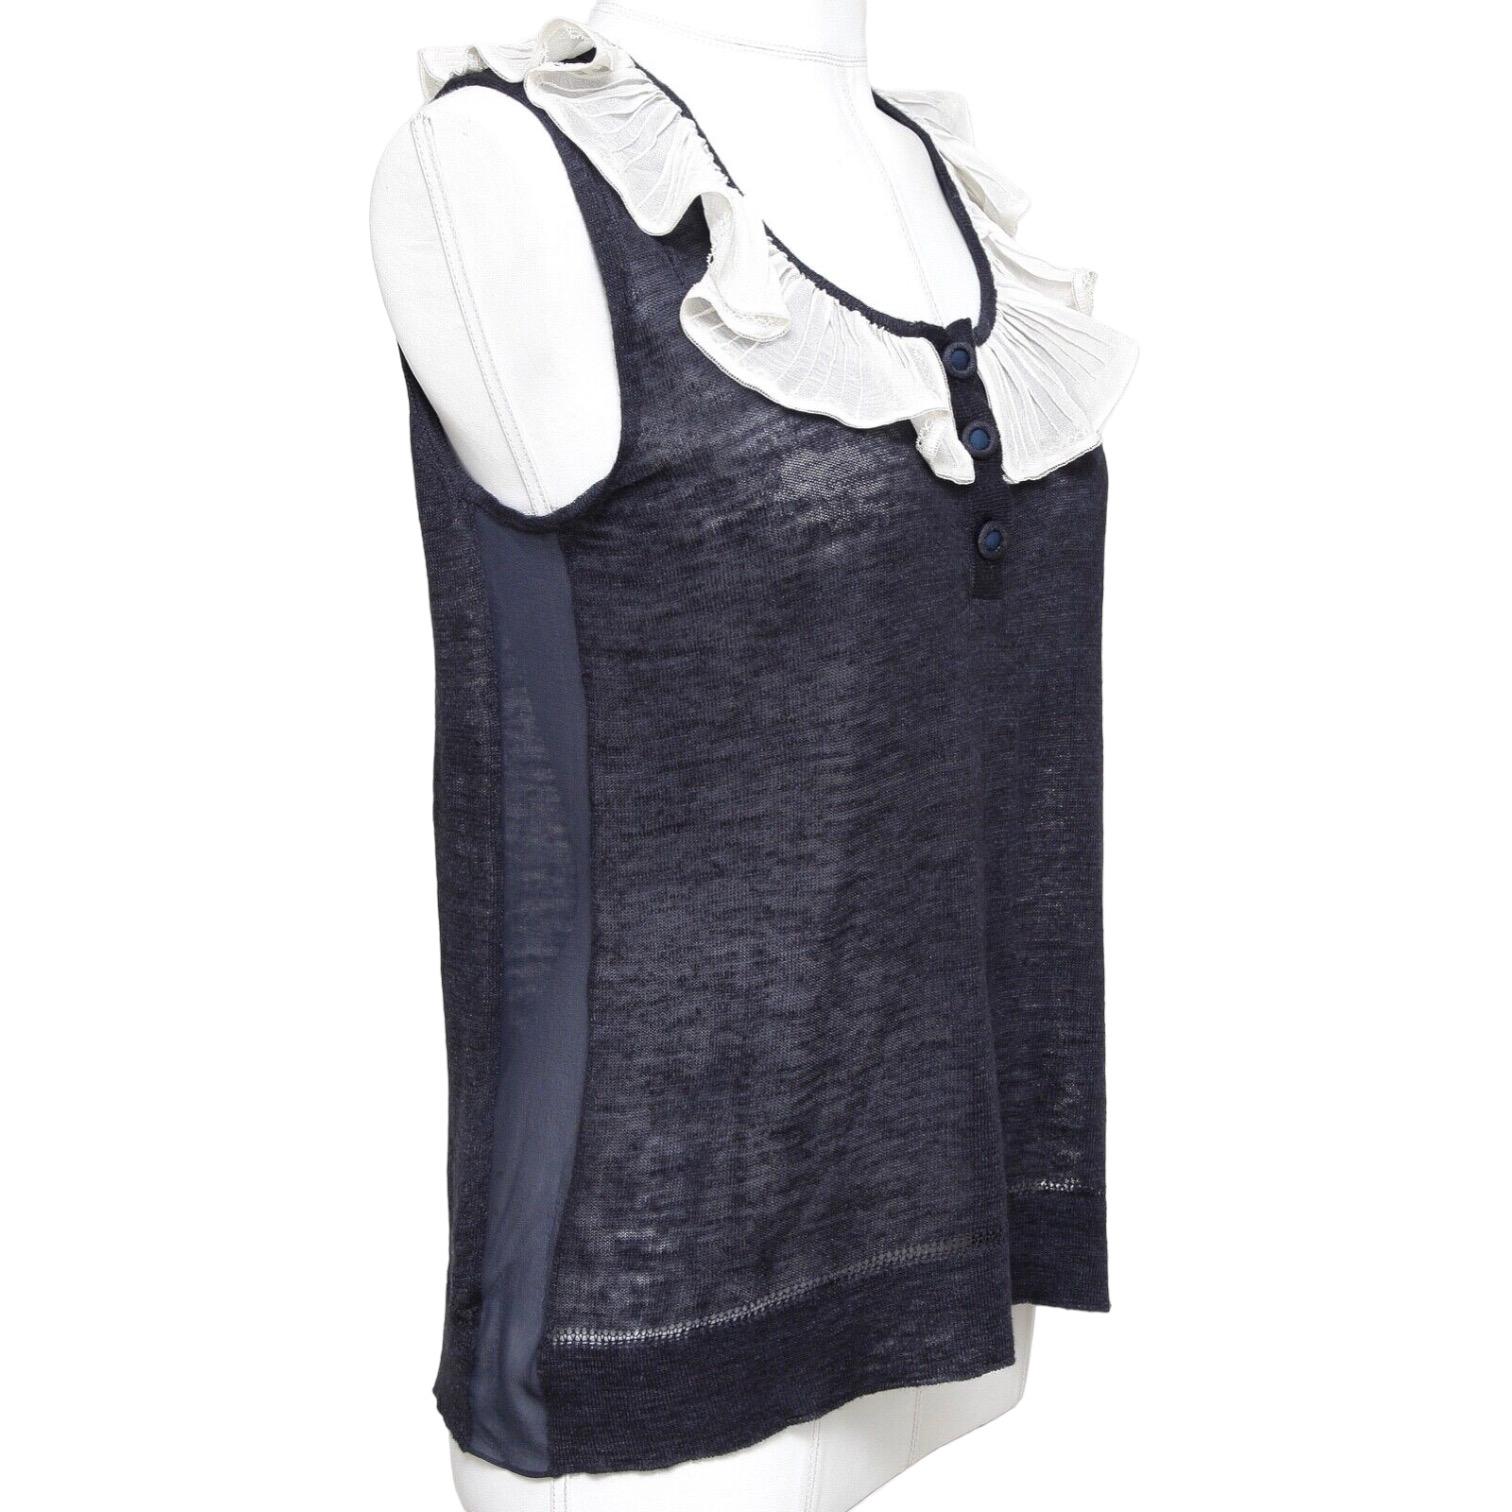 GUARANTEED AUTHENTIC CHLOE 2007 SLEEVELESS LIGHTWEIGHT NAVY TOP

Design:
- Lightweight sleeveless navy silk blend top with ivory ruffle around neckline.
- 3 button henley style slip on.
- Side sheer silk panels.

Size: XS

Material: 70% Linen, 30%